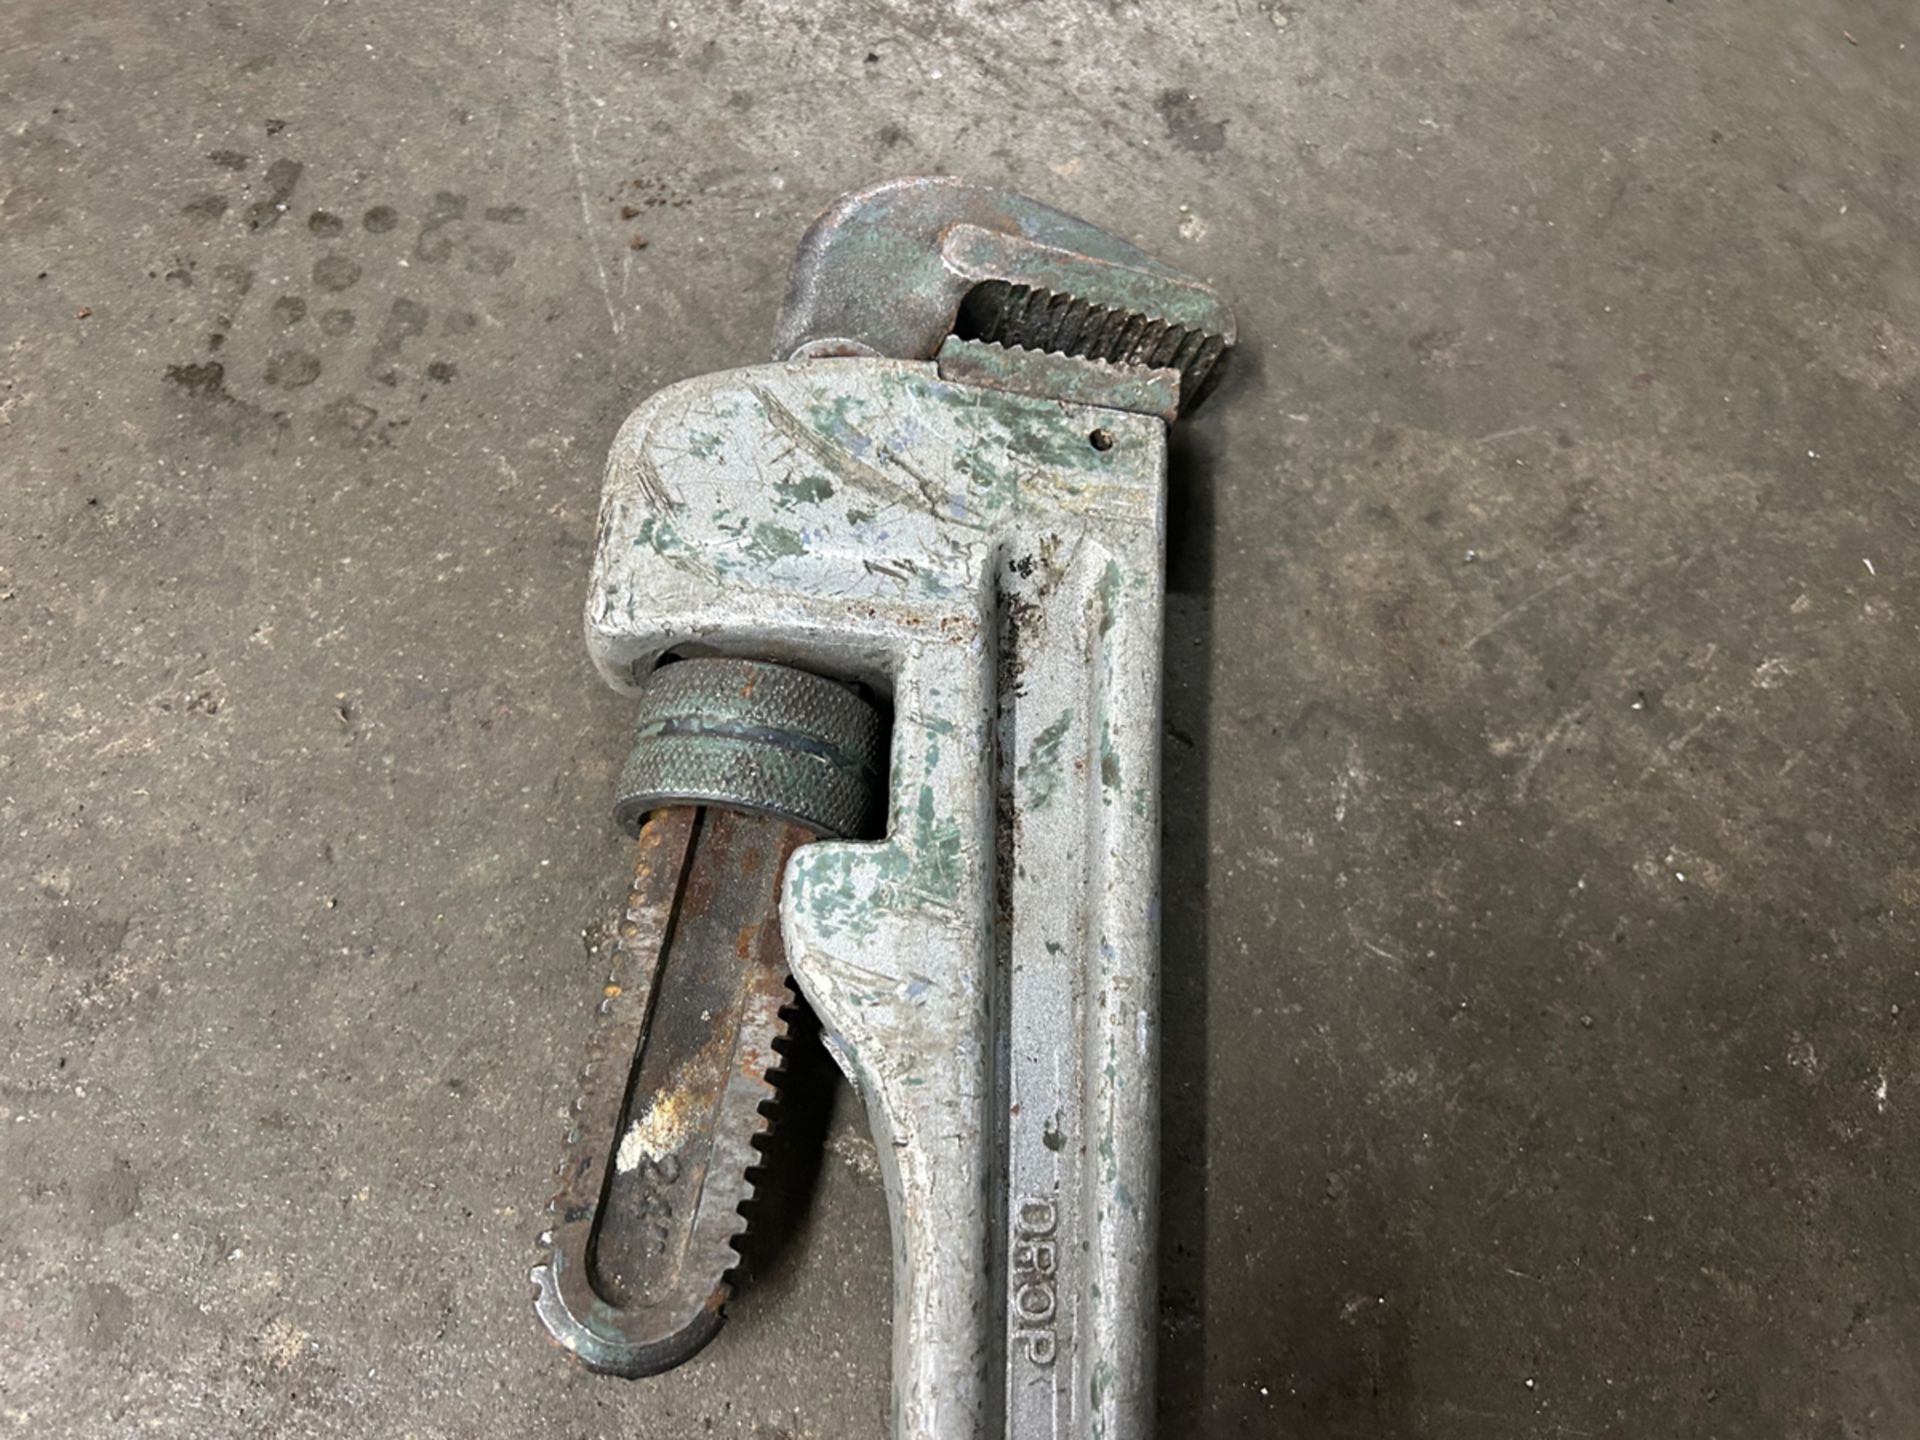 24" Aluminum Pipe Wrench - Image 2 of 2